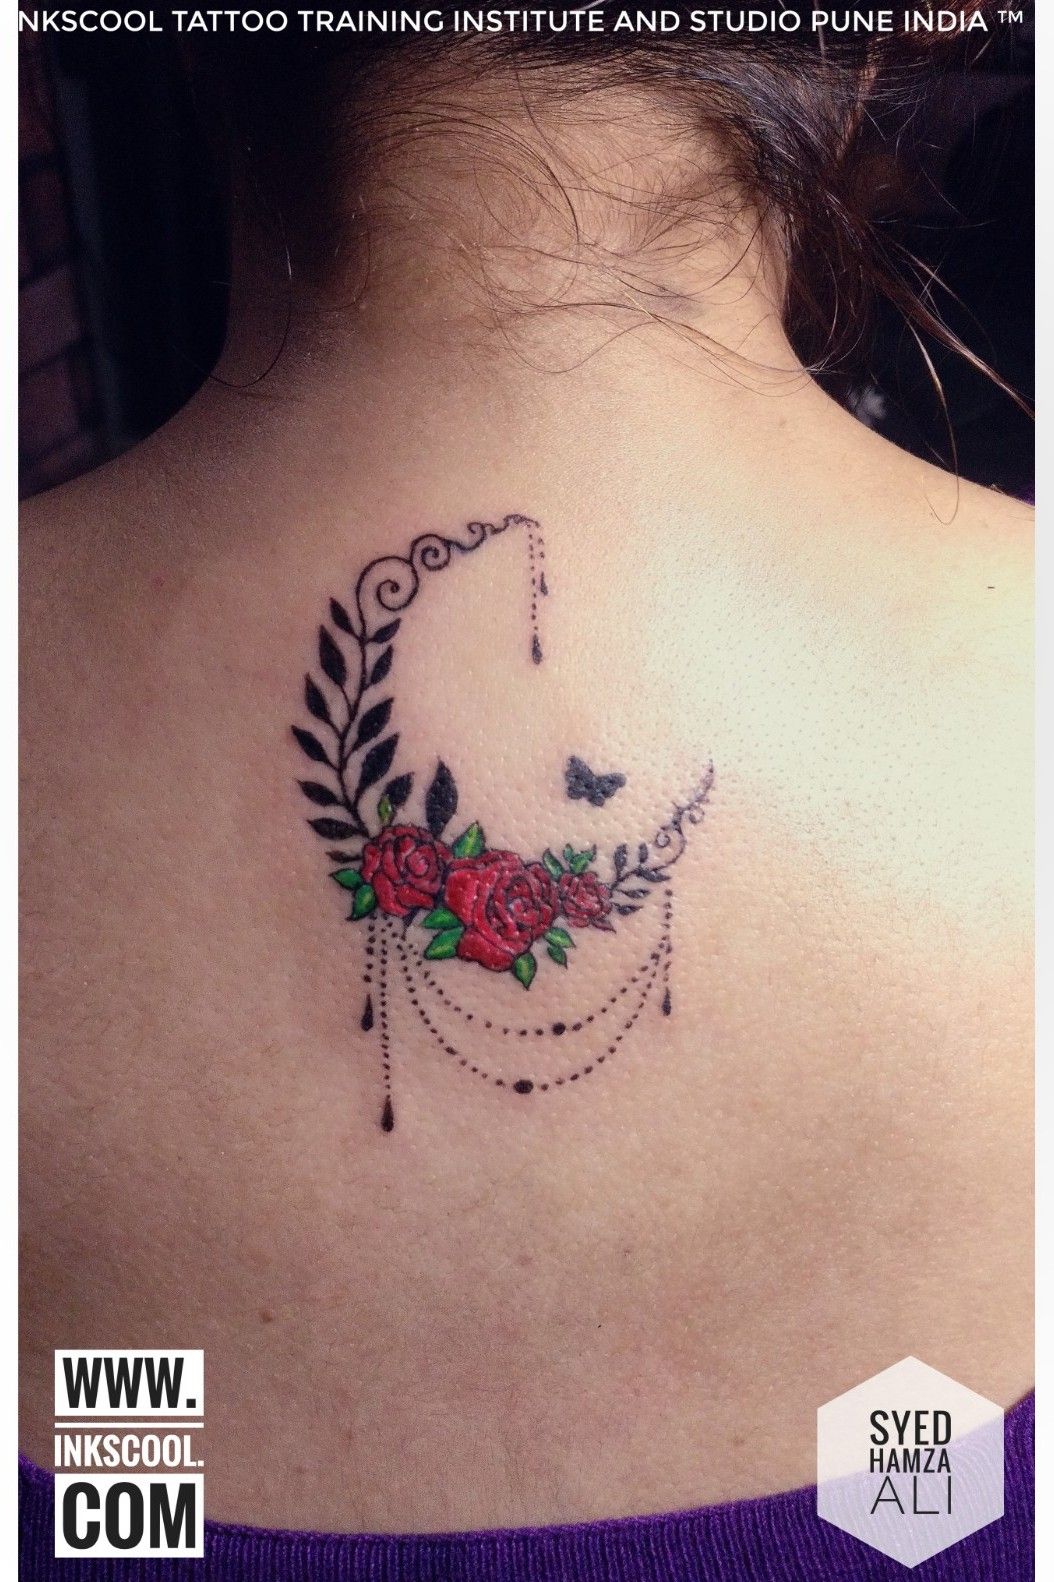 Tattoo uploaded by Inkscool Tattoo Training Institute And Studio Pune India  ™ • Delicate floral dream catcher tattoo in the shape of a crescent moon,  designed and tattooed by Tattoo Artist Syed